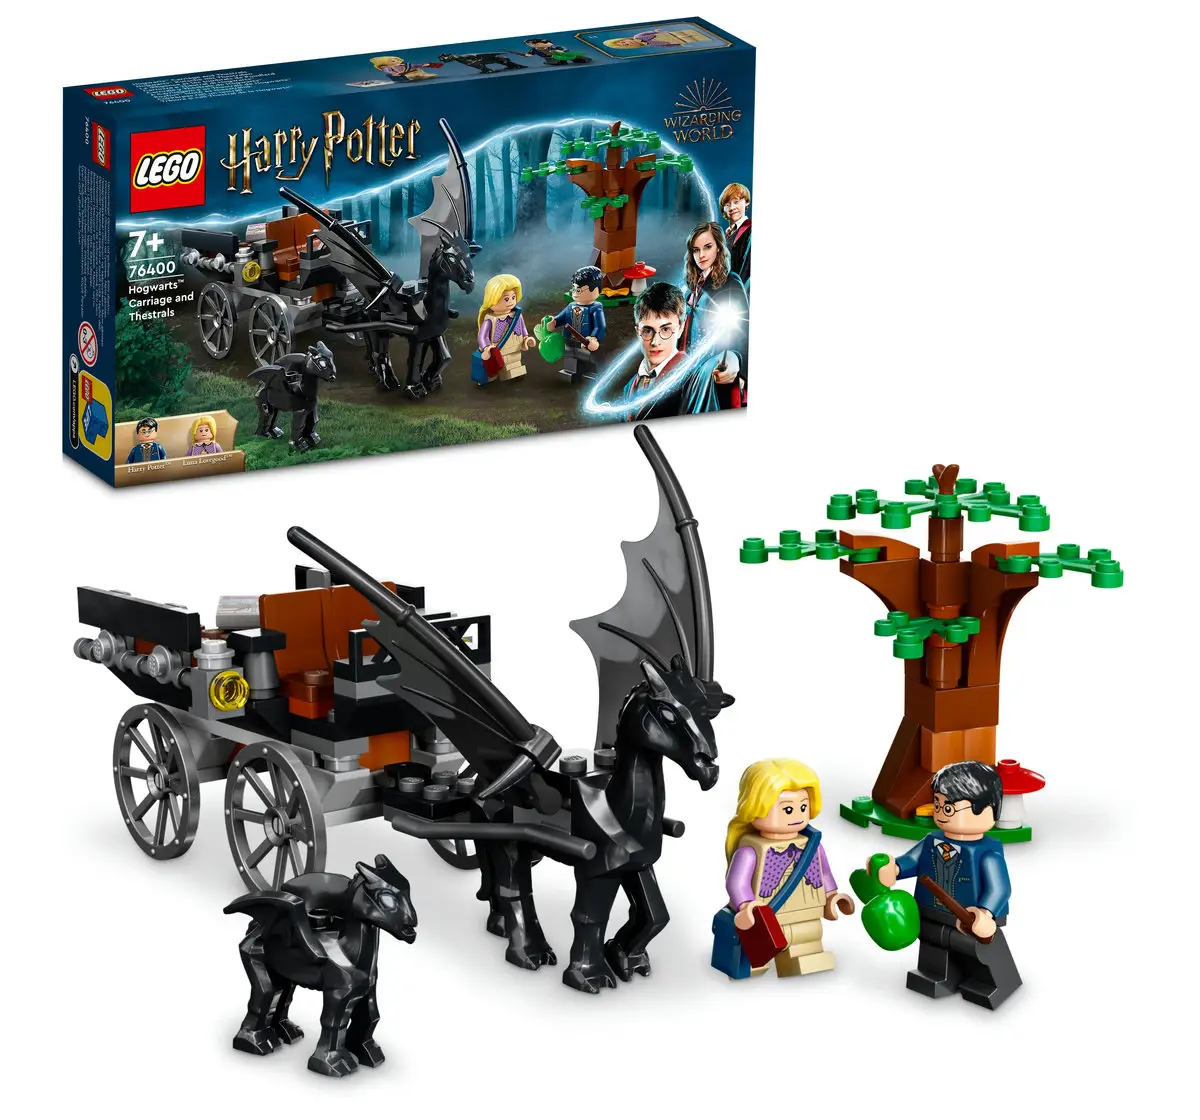 Lego Harry Potter Hogwarts Carriage And Thestrals 76400 Building Kit (121 Pieces)